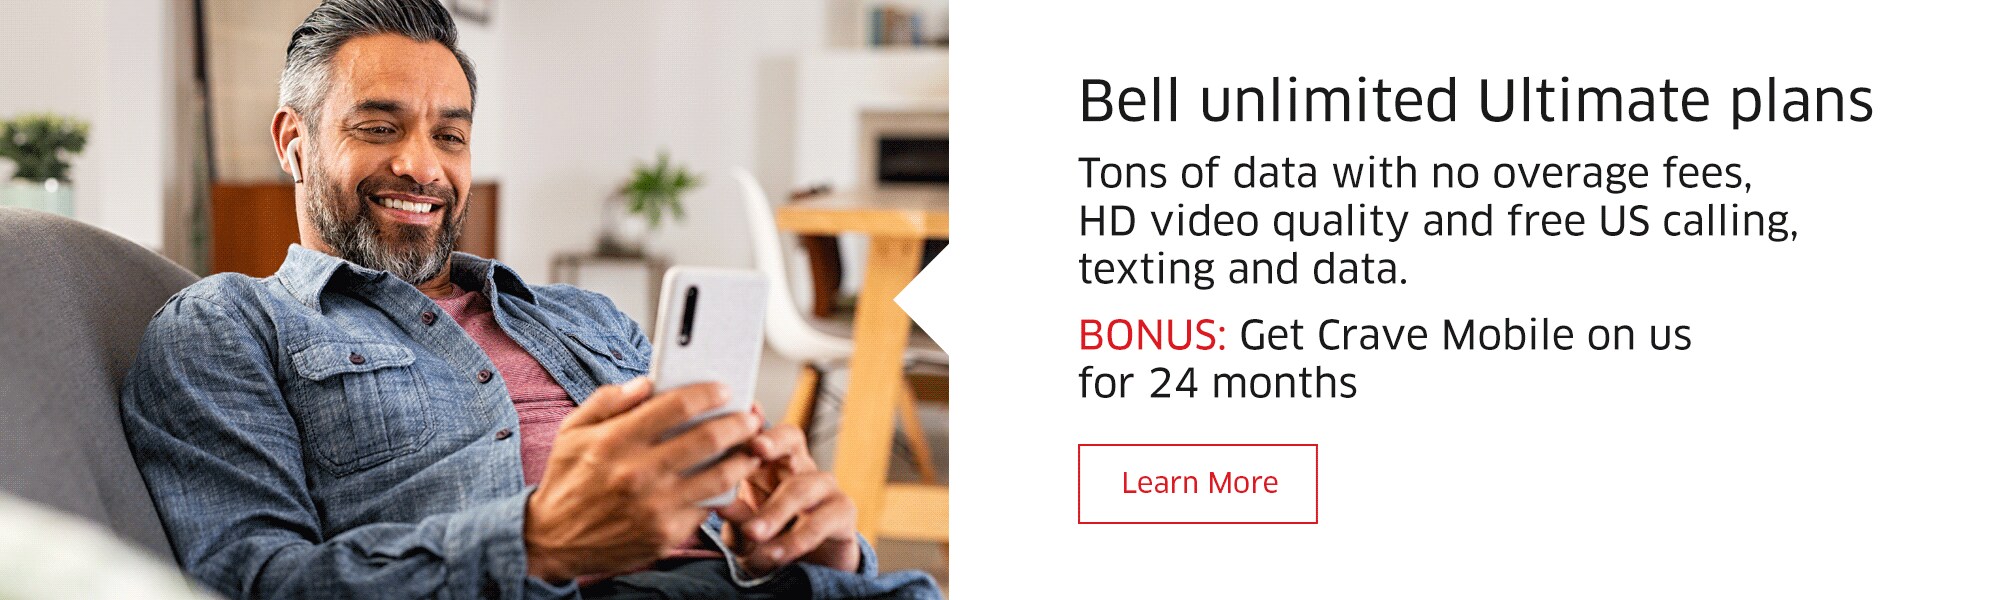 Bell unlimited Ultimate plans  Tons of data with no overage fees, HD video quality and free US calling, texting and data.  Shortened subcopy (mobile): Tons of data with no overage fees  BONUS: Get Crave Mobile on us for 24 months  Learn More